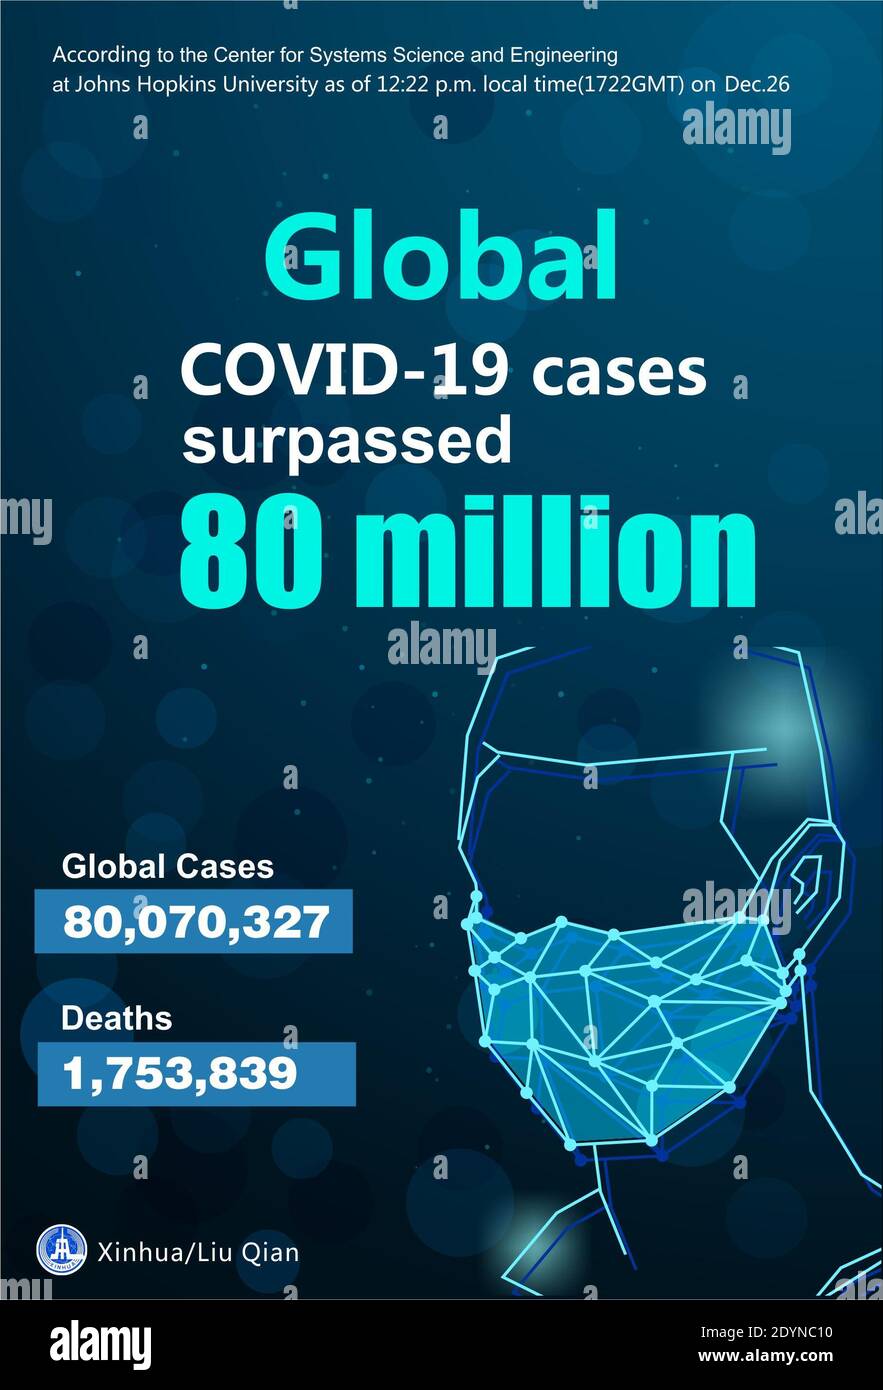 Beijing, China. 26th Dec, 2020. This image shows that global COVID-19 cases surpassed 80 million on Dec. 26, 2020 according to the Center for Systems Science and Engineering (CSSE) at Johns Hopkins University. Credit: Liu Qian/Xinhua/Alamy Live News Stock Photo